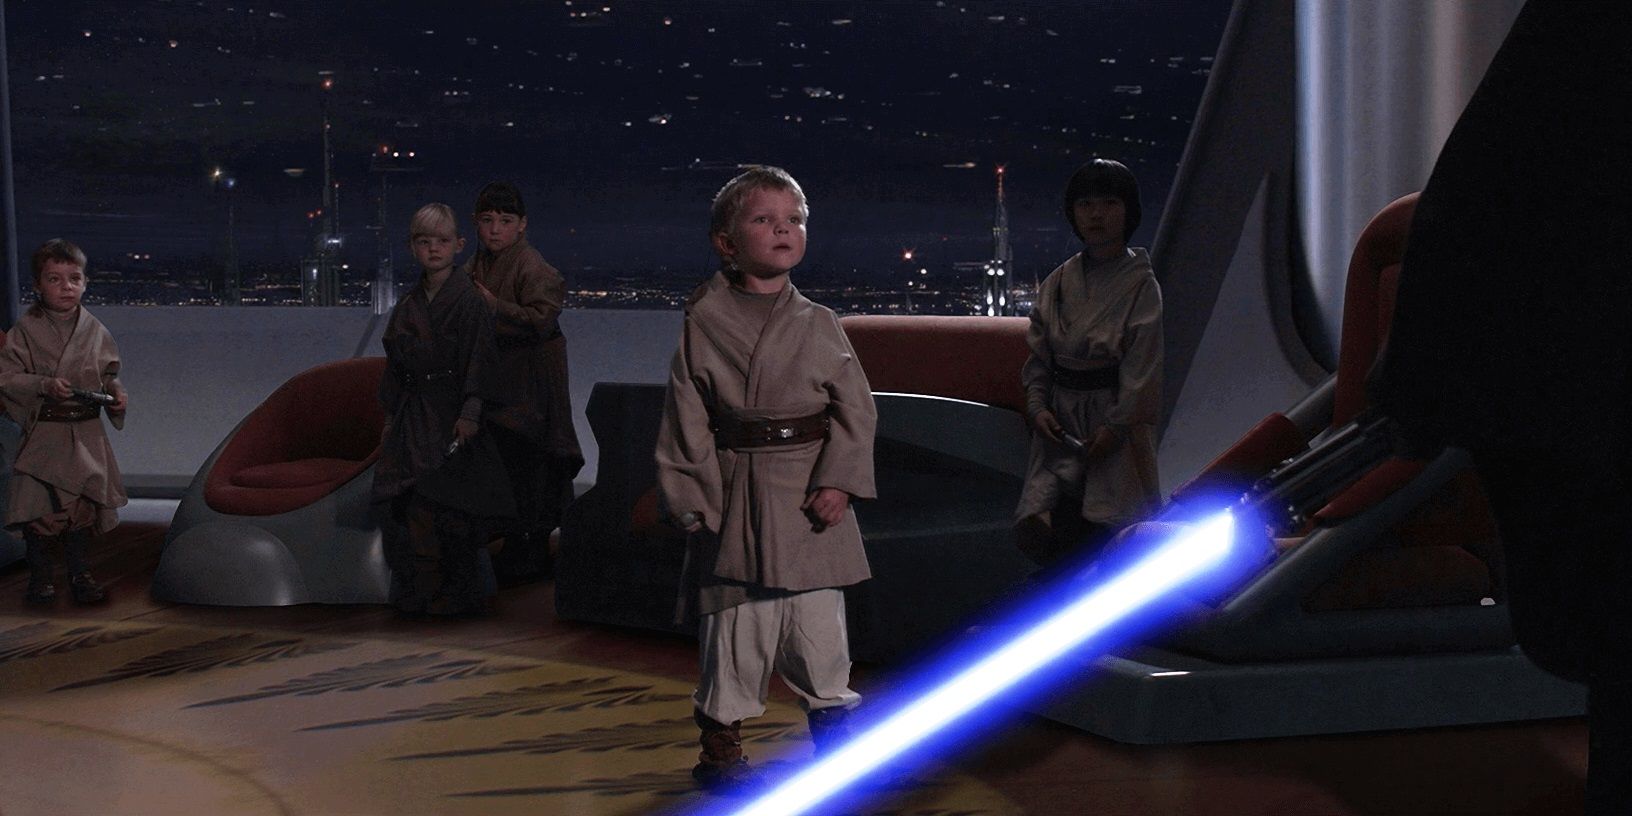 Anakin slaughters the younglings in Revenge of the Sith